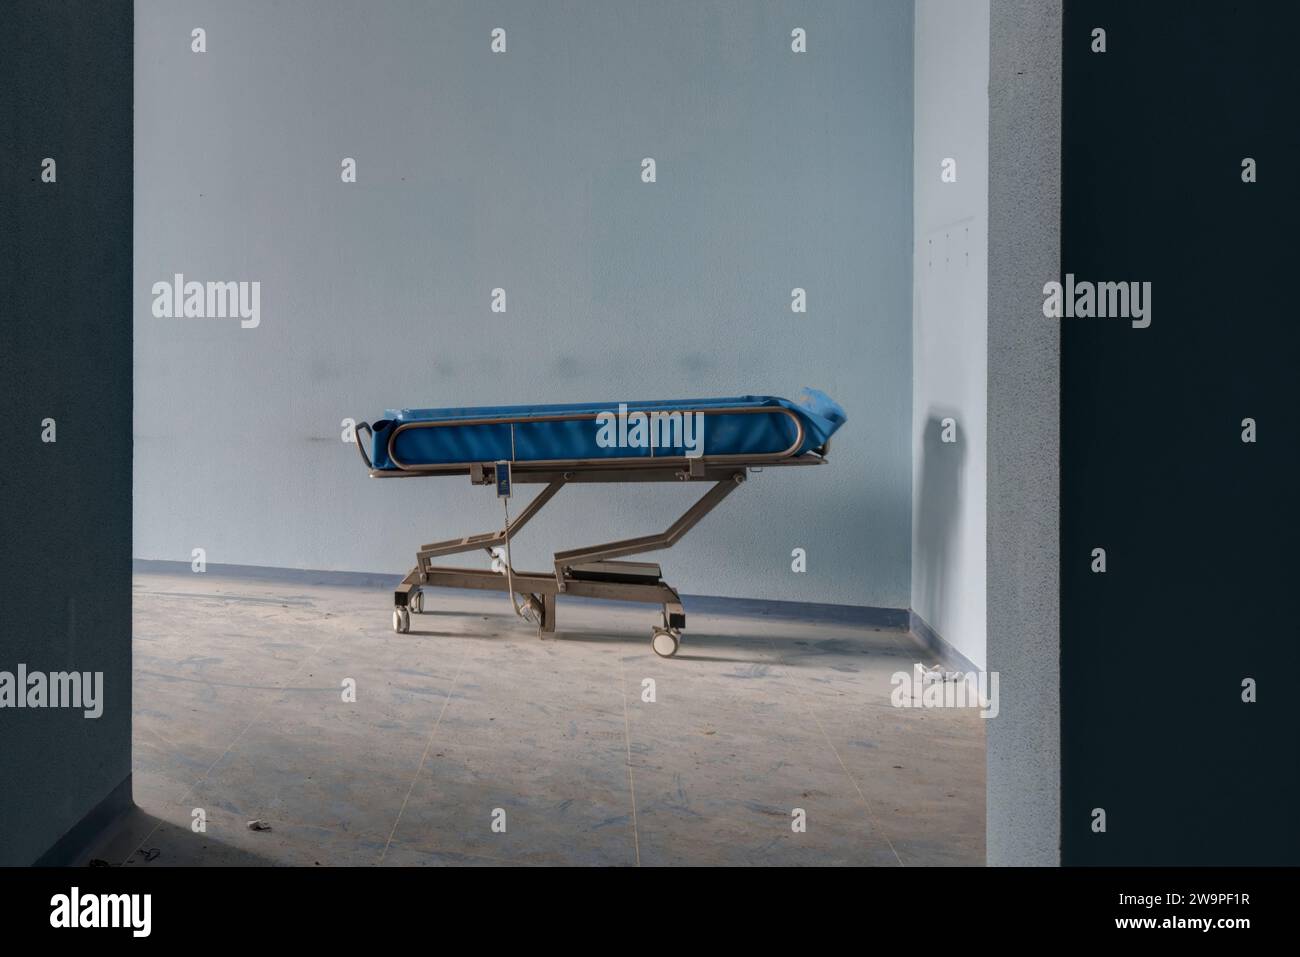 December 10, 2023, Room of an abandoned hospital, with beds and medical equipment. URBEX Stock Photo